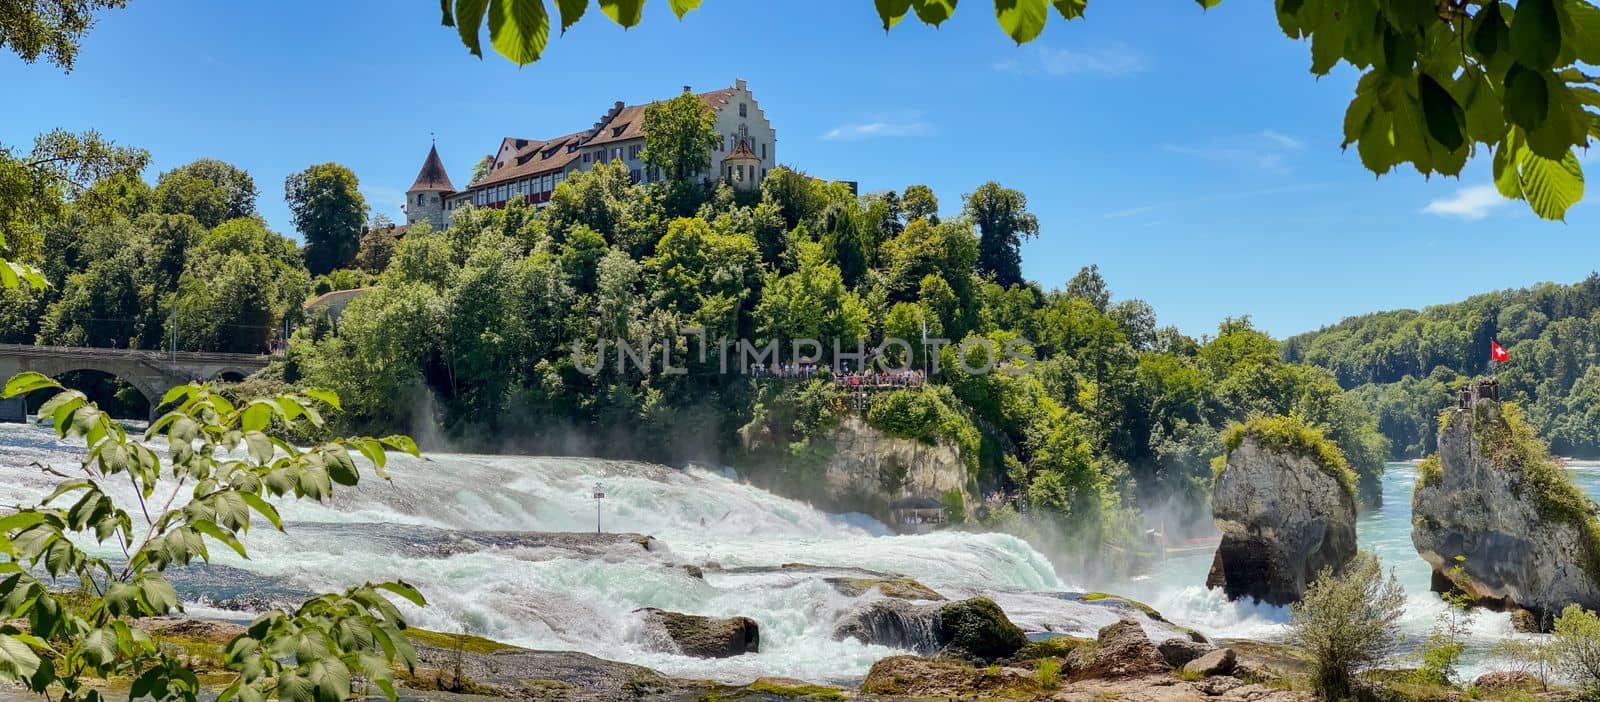 Panorama from the vantage point at the Rheinfall Schaffhausen with the river and Lauffen Castle, Switzerland